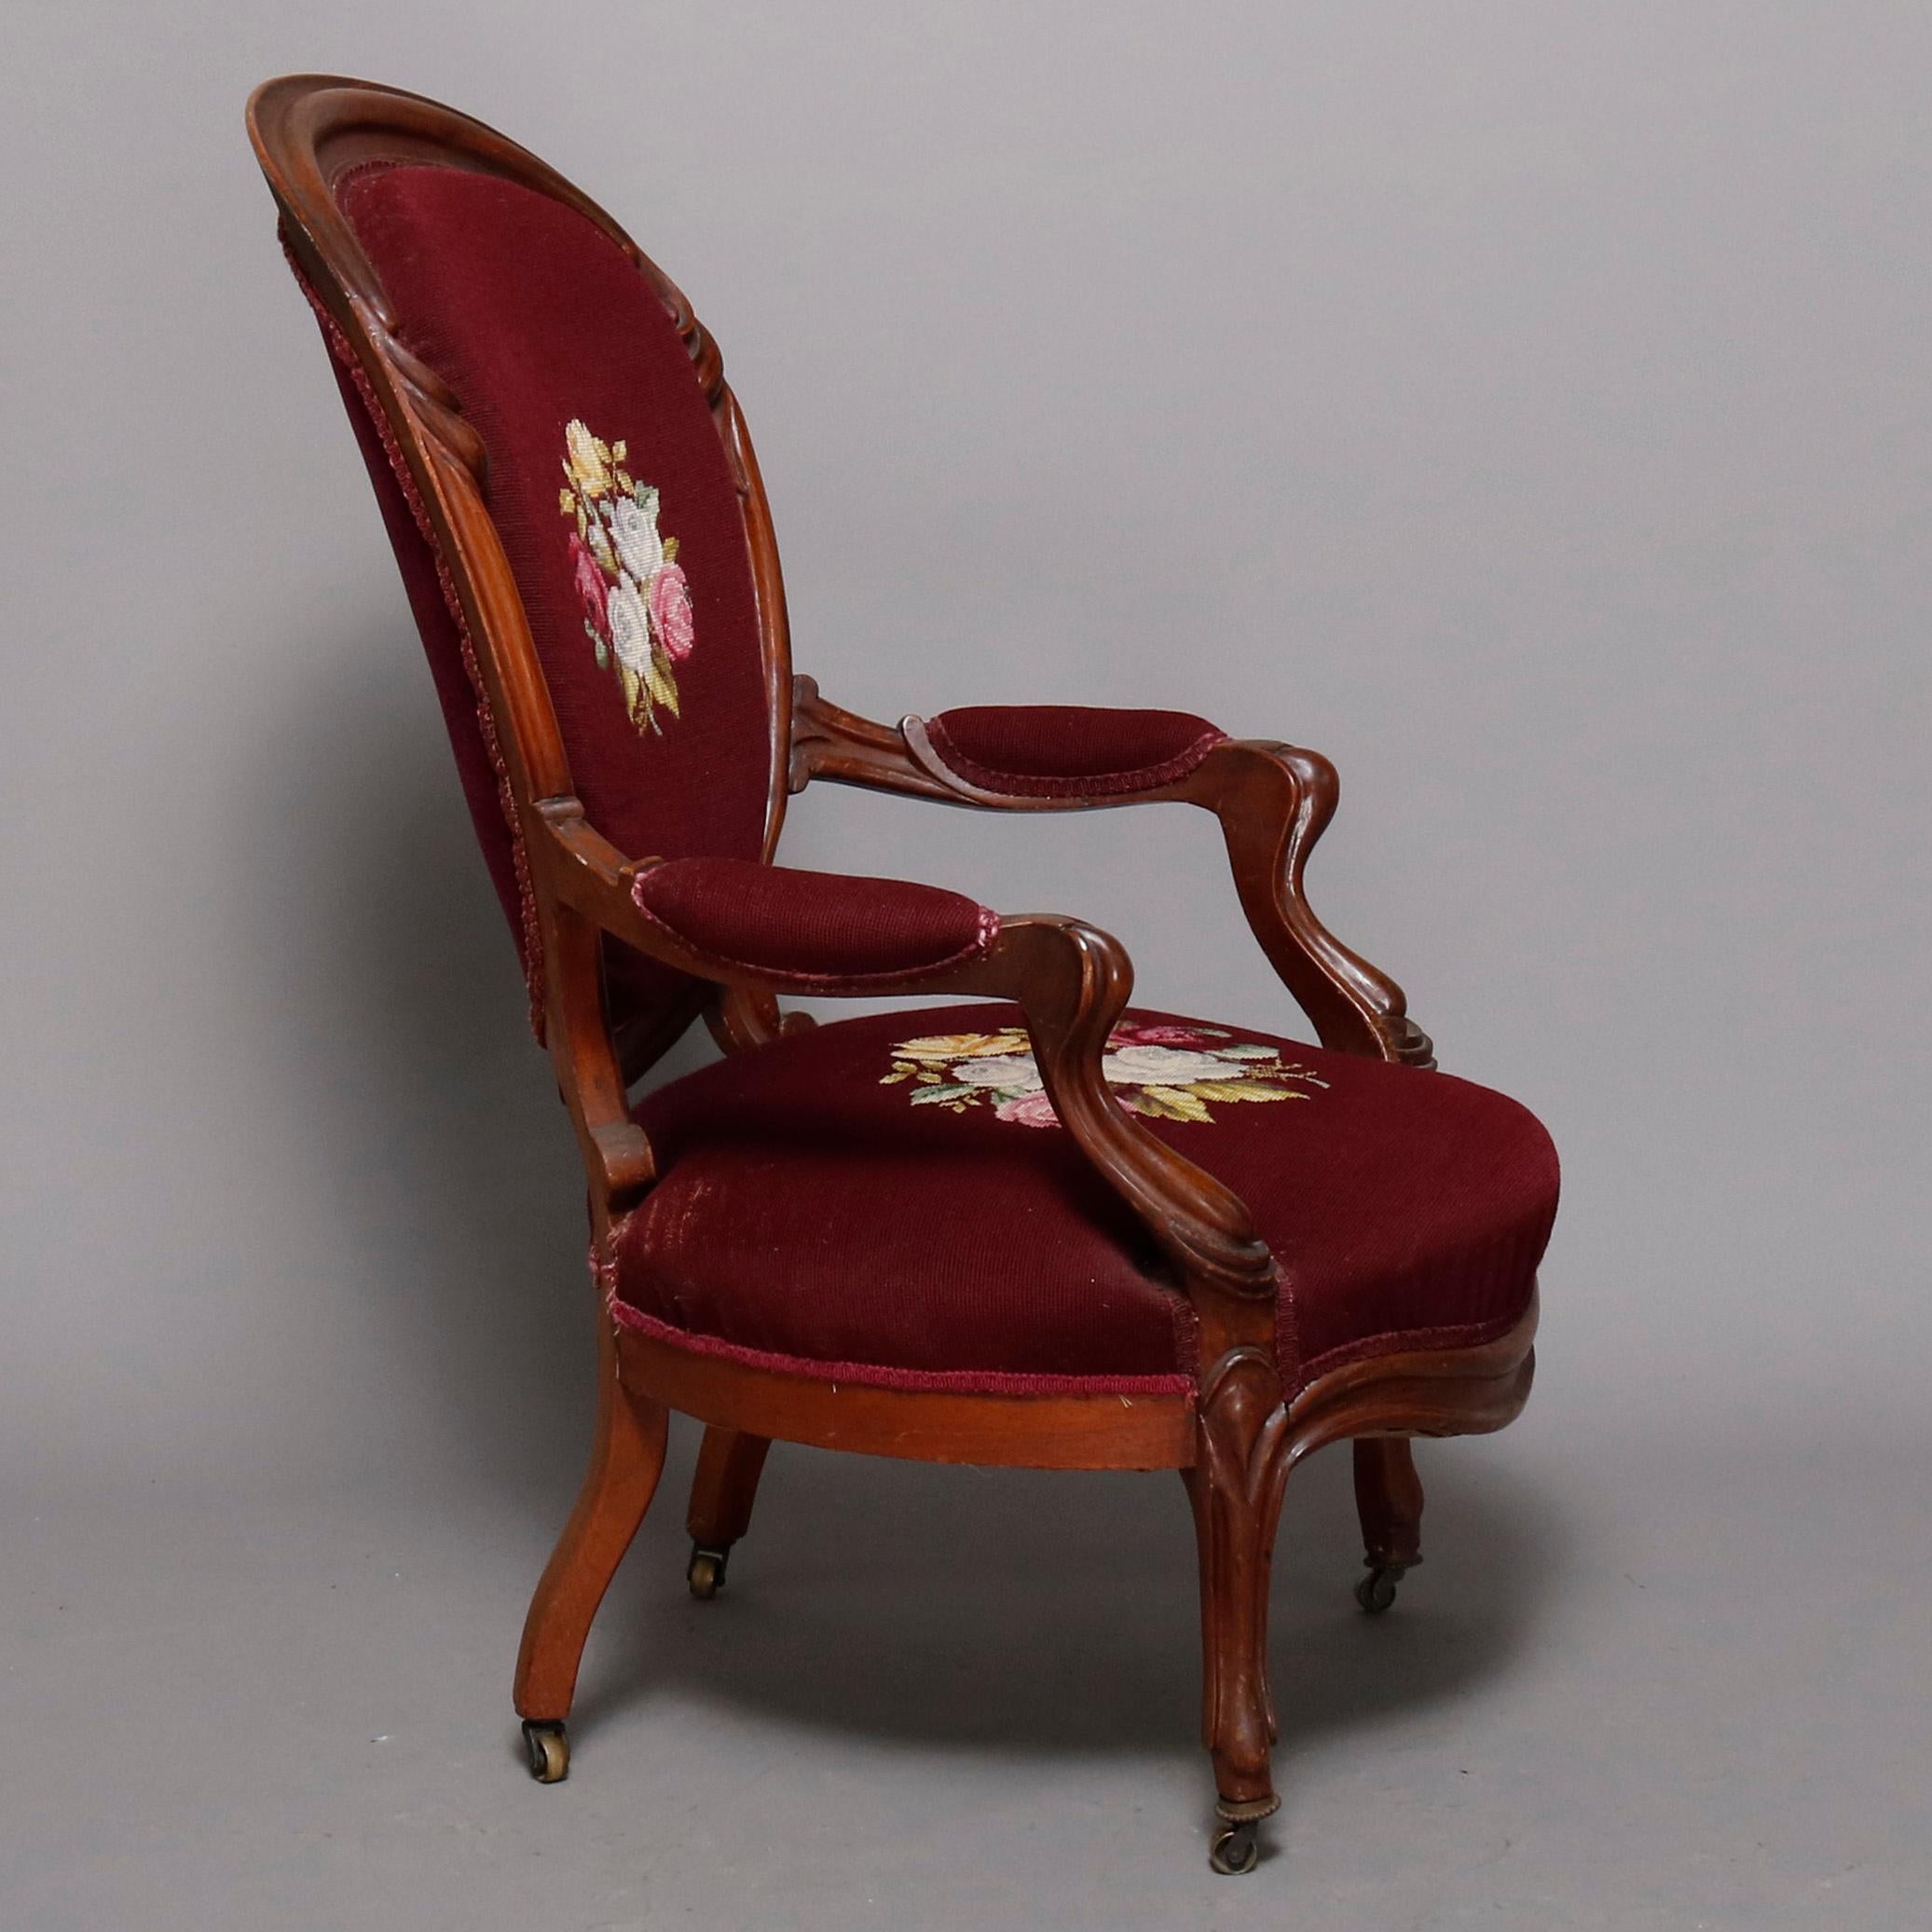 Upholstery Antique Victorian Carved Walnut and Needlepoint Parlor Armchair, circa 1890